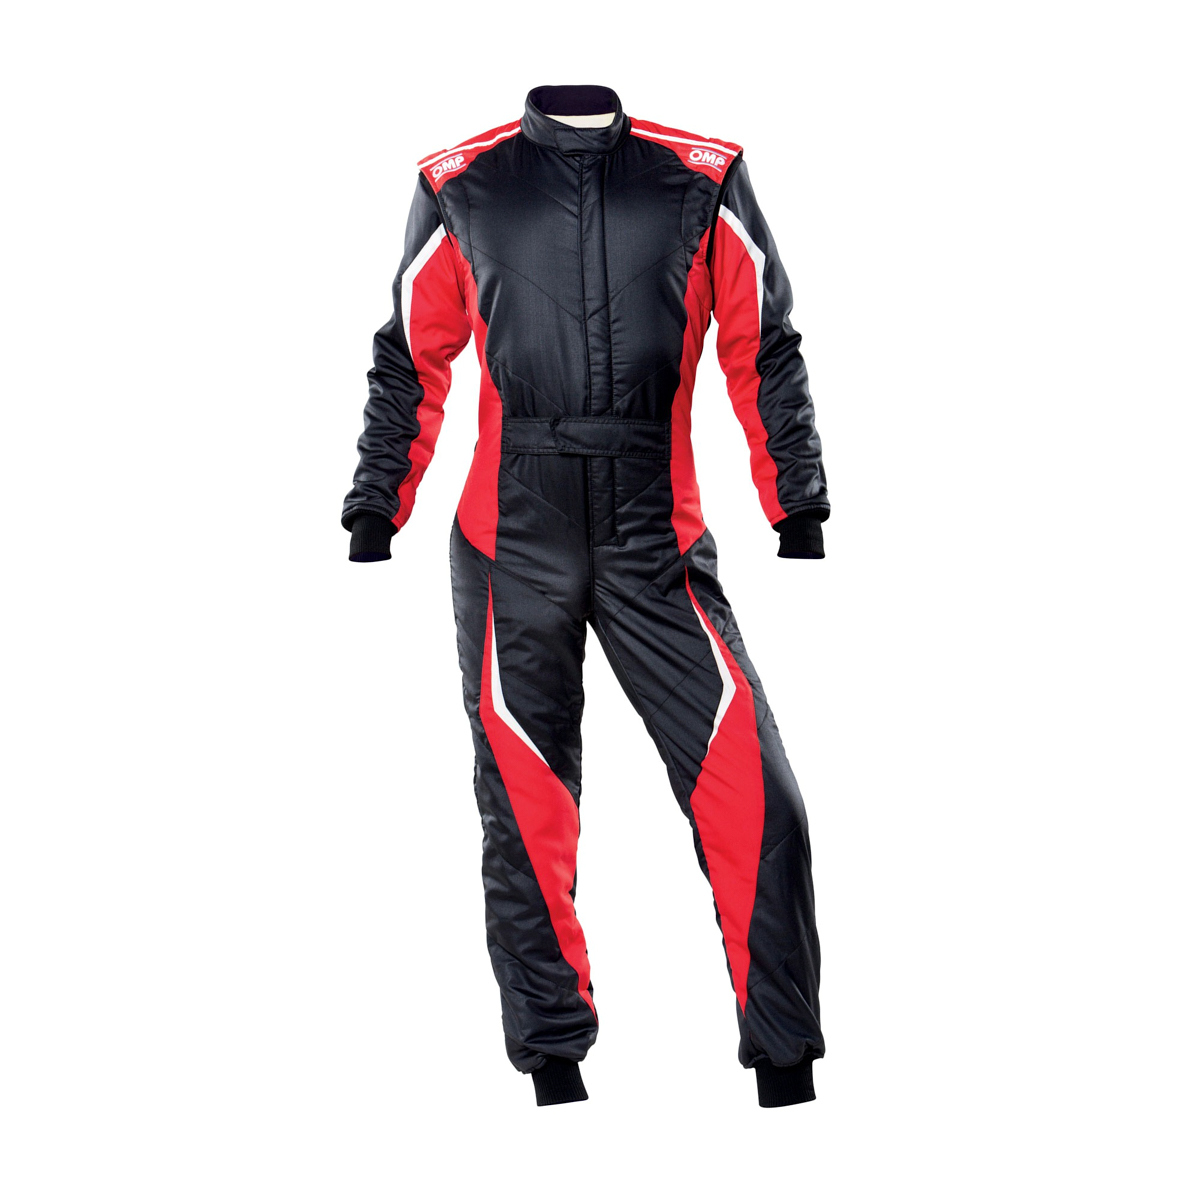 OMP Racing IA01859E06058 Driving Suit, Tecnica Evo, 1-Piece, SFI 3.2A/5, FIA Approved, Double Layer, Fire Retardant Fabric, Black / Red, Size 58, Each